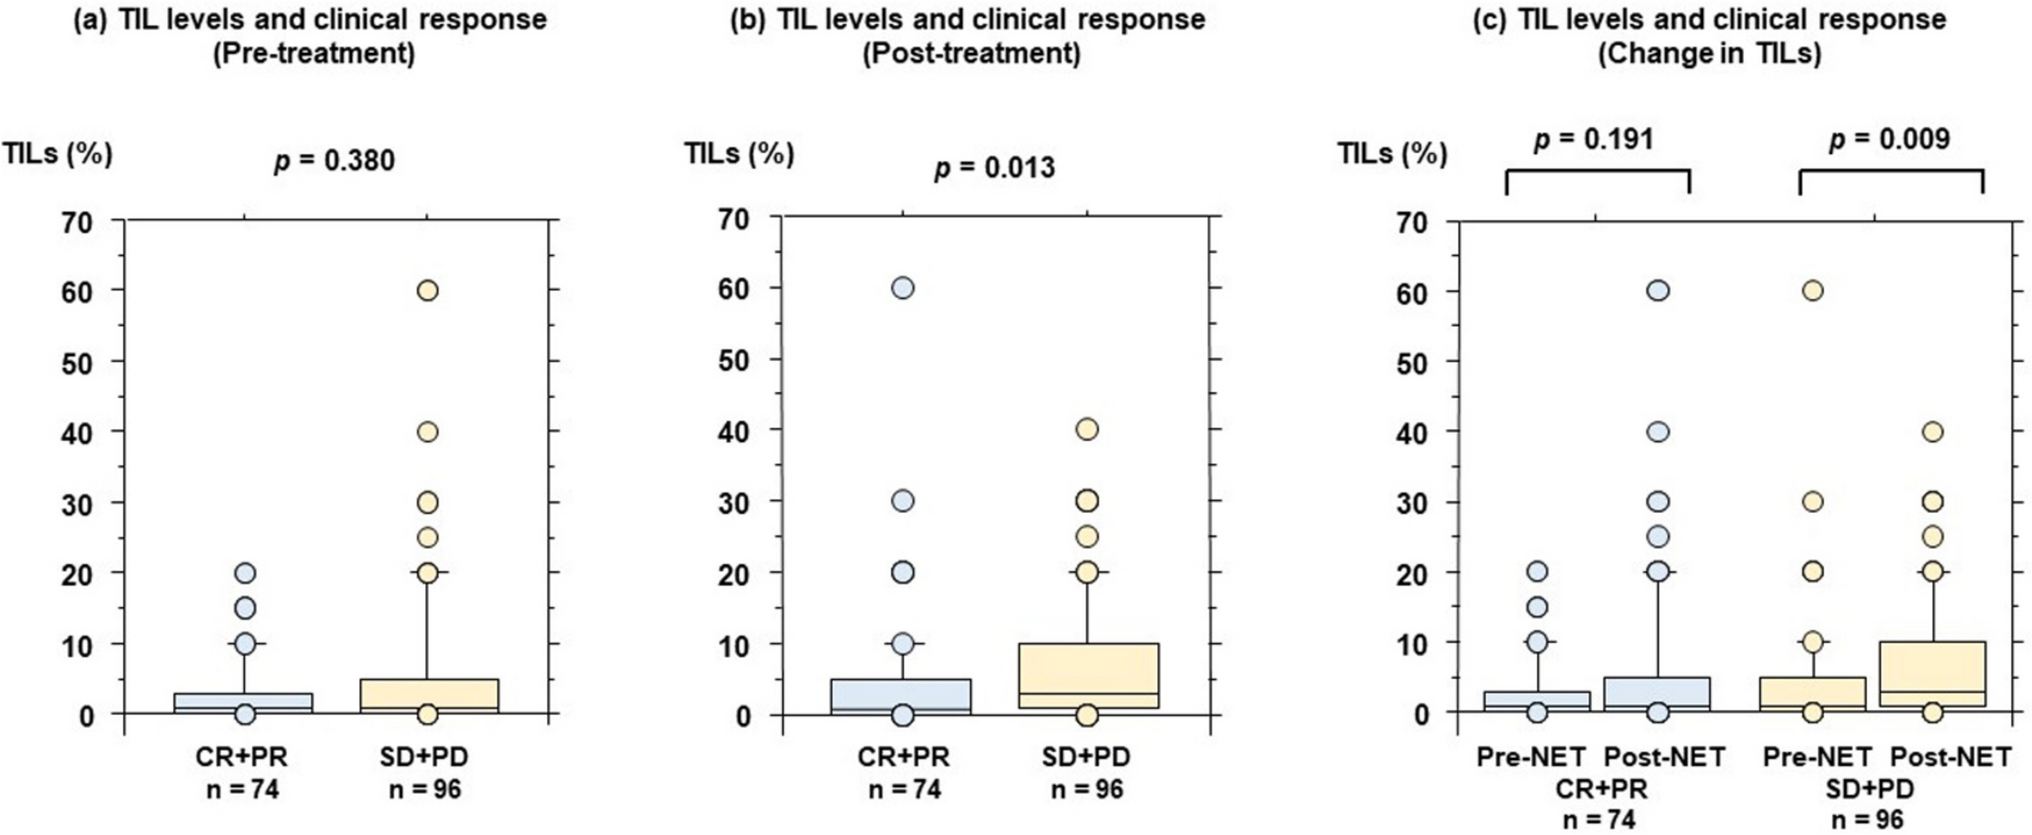 Reply to comment on ‘An increase in tumor-infiltrating lymphocytes after treatment is significantly associated with a poor response to neoadjuvant endocrine therapy for estrogen receptor-positive/HER2-negative breast cancers’ by Fukui et al.